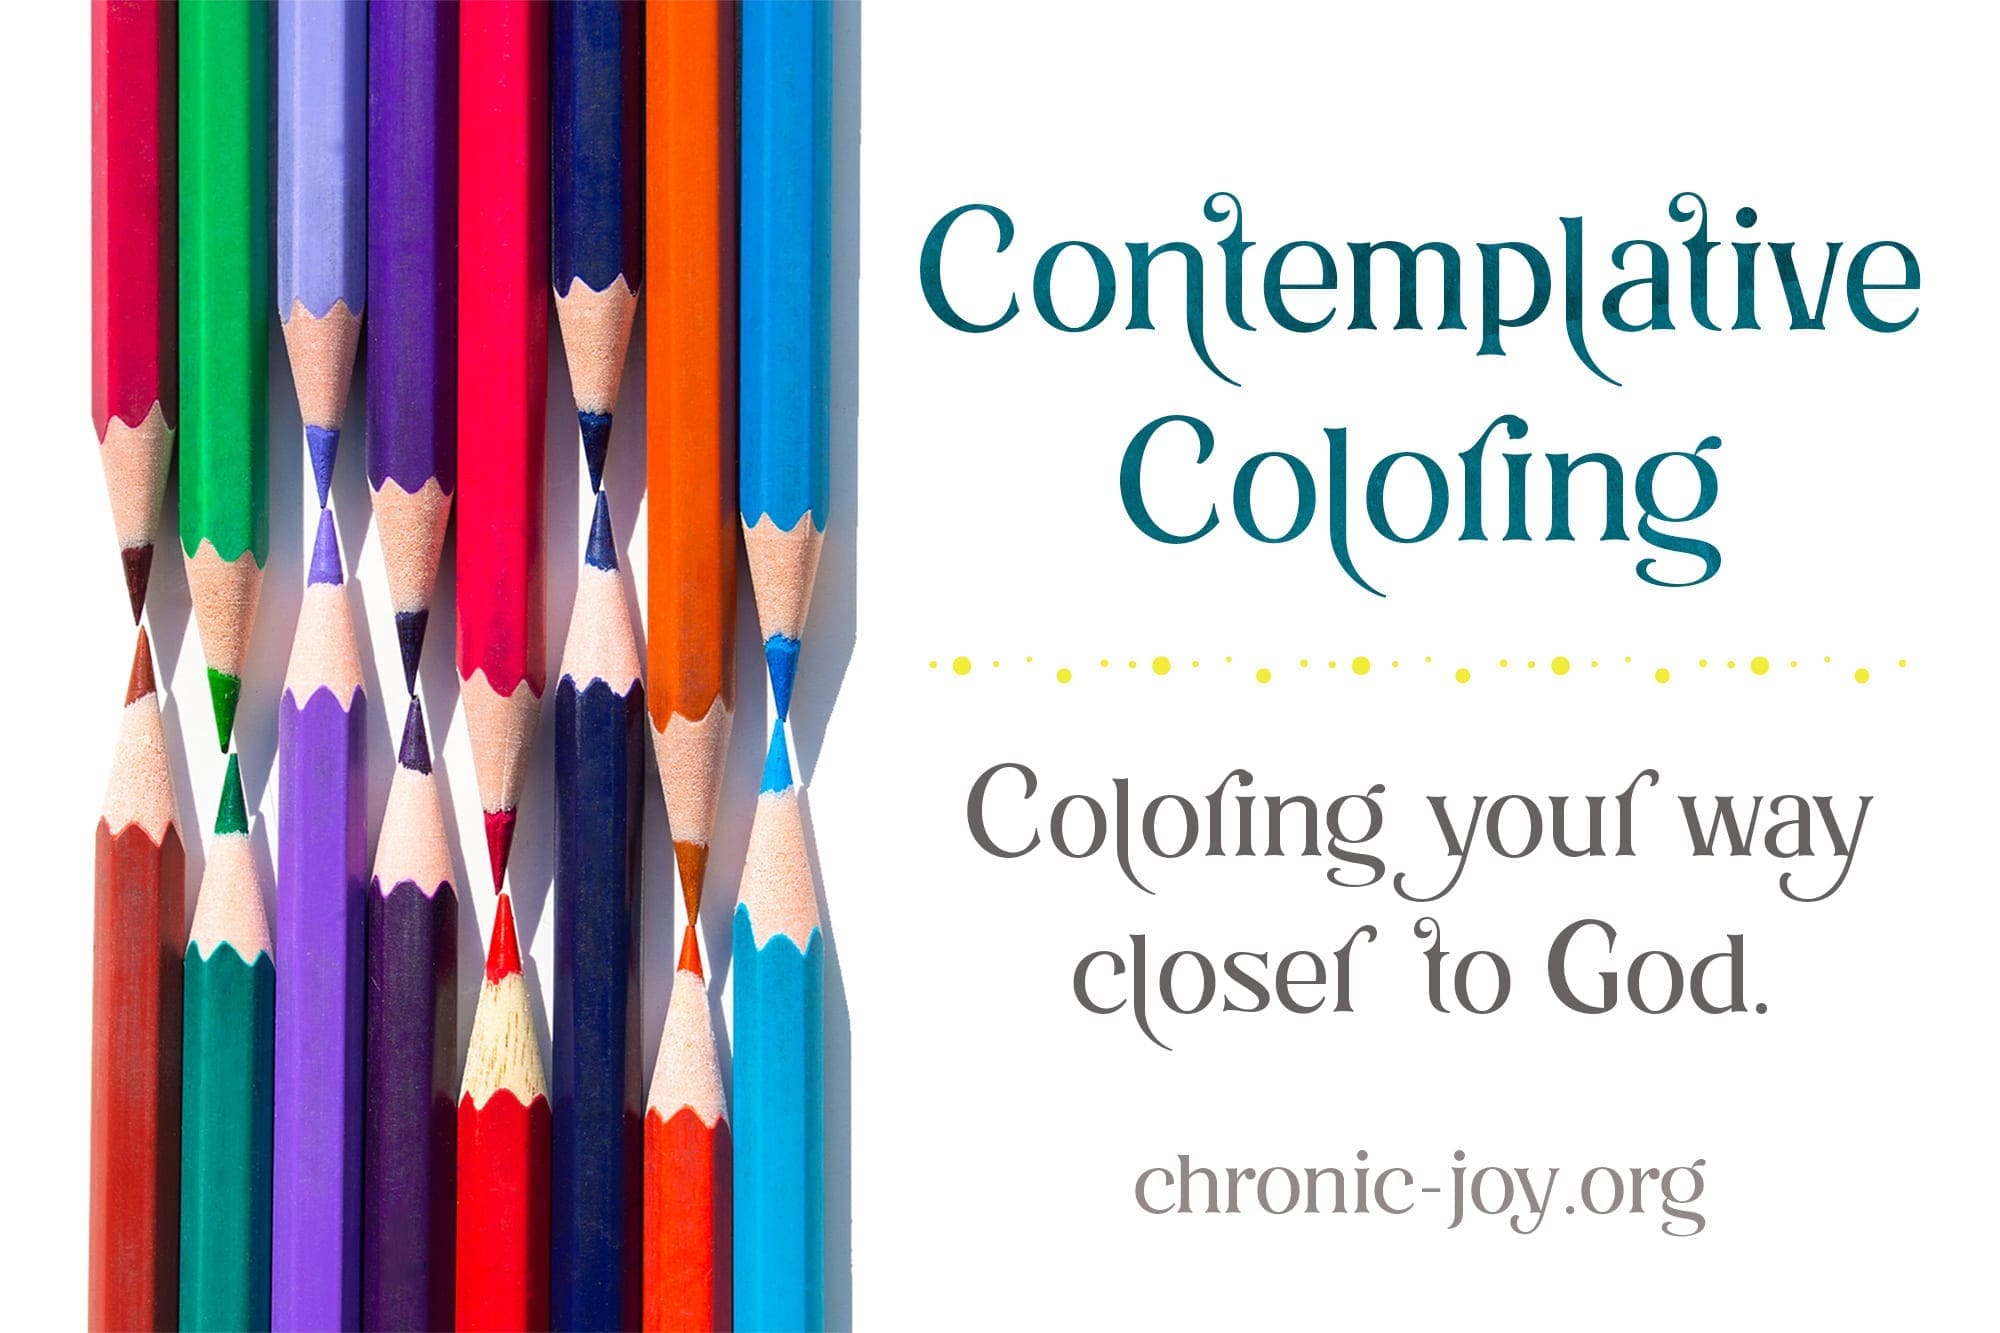 Contemplative Coloring • Coloring your way closer to God.